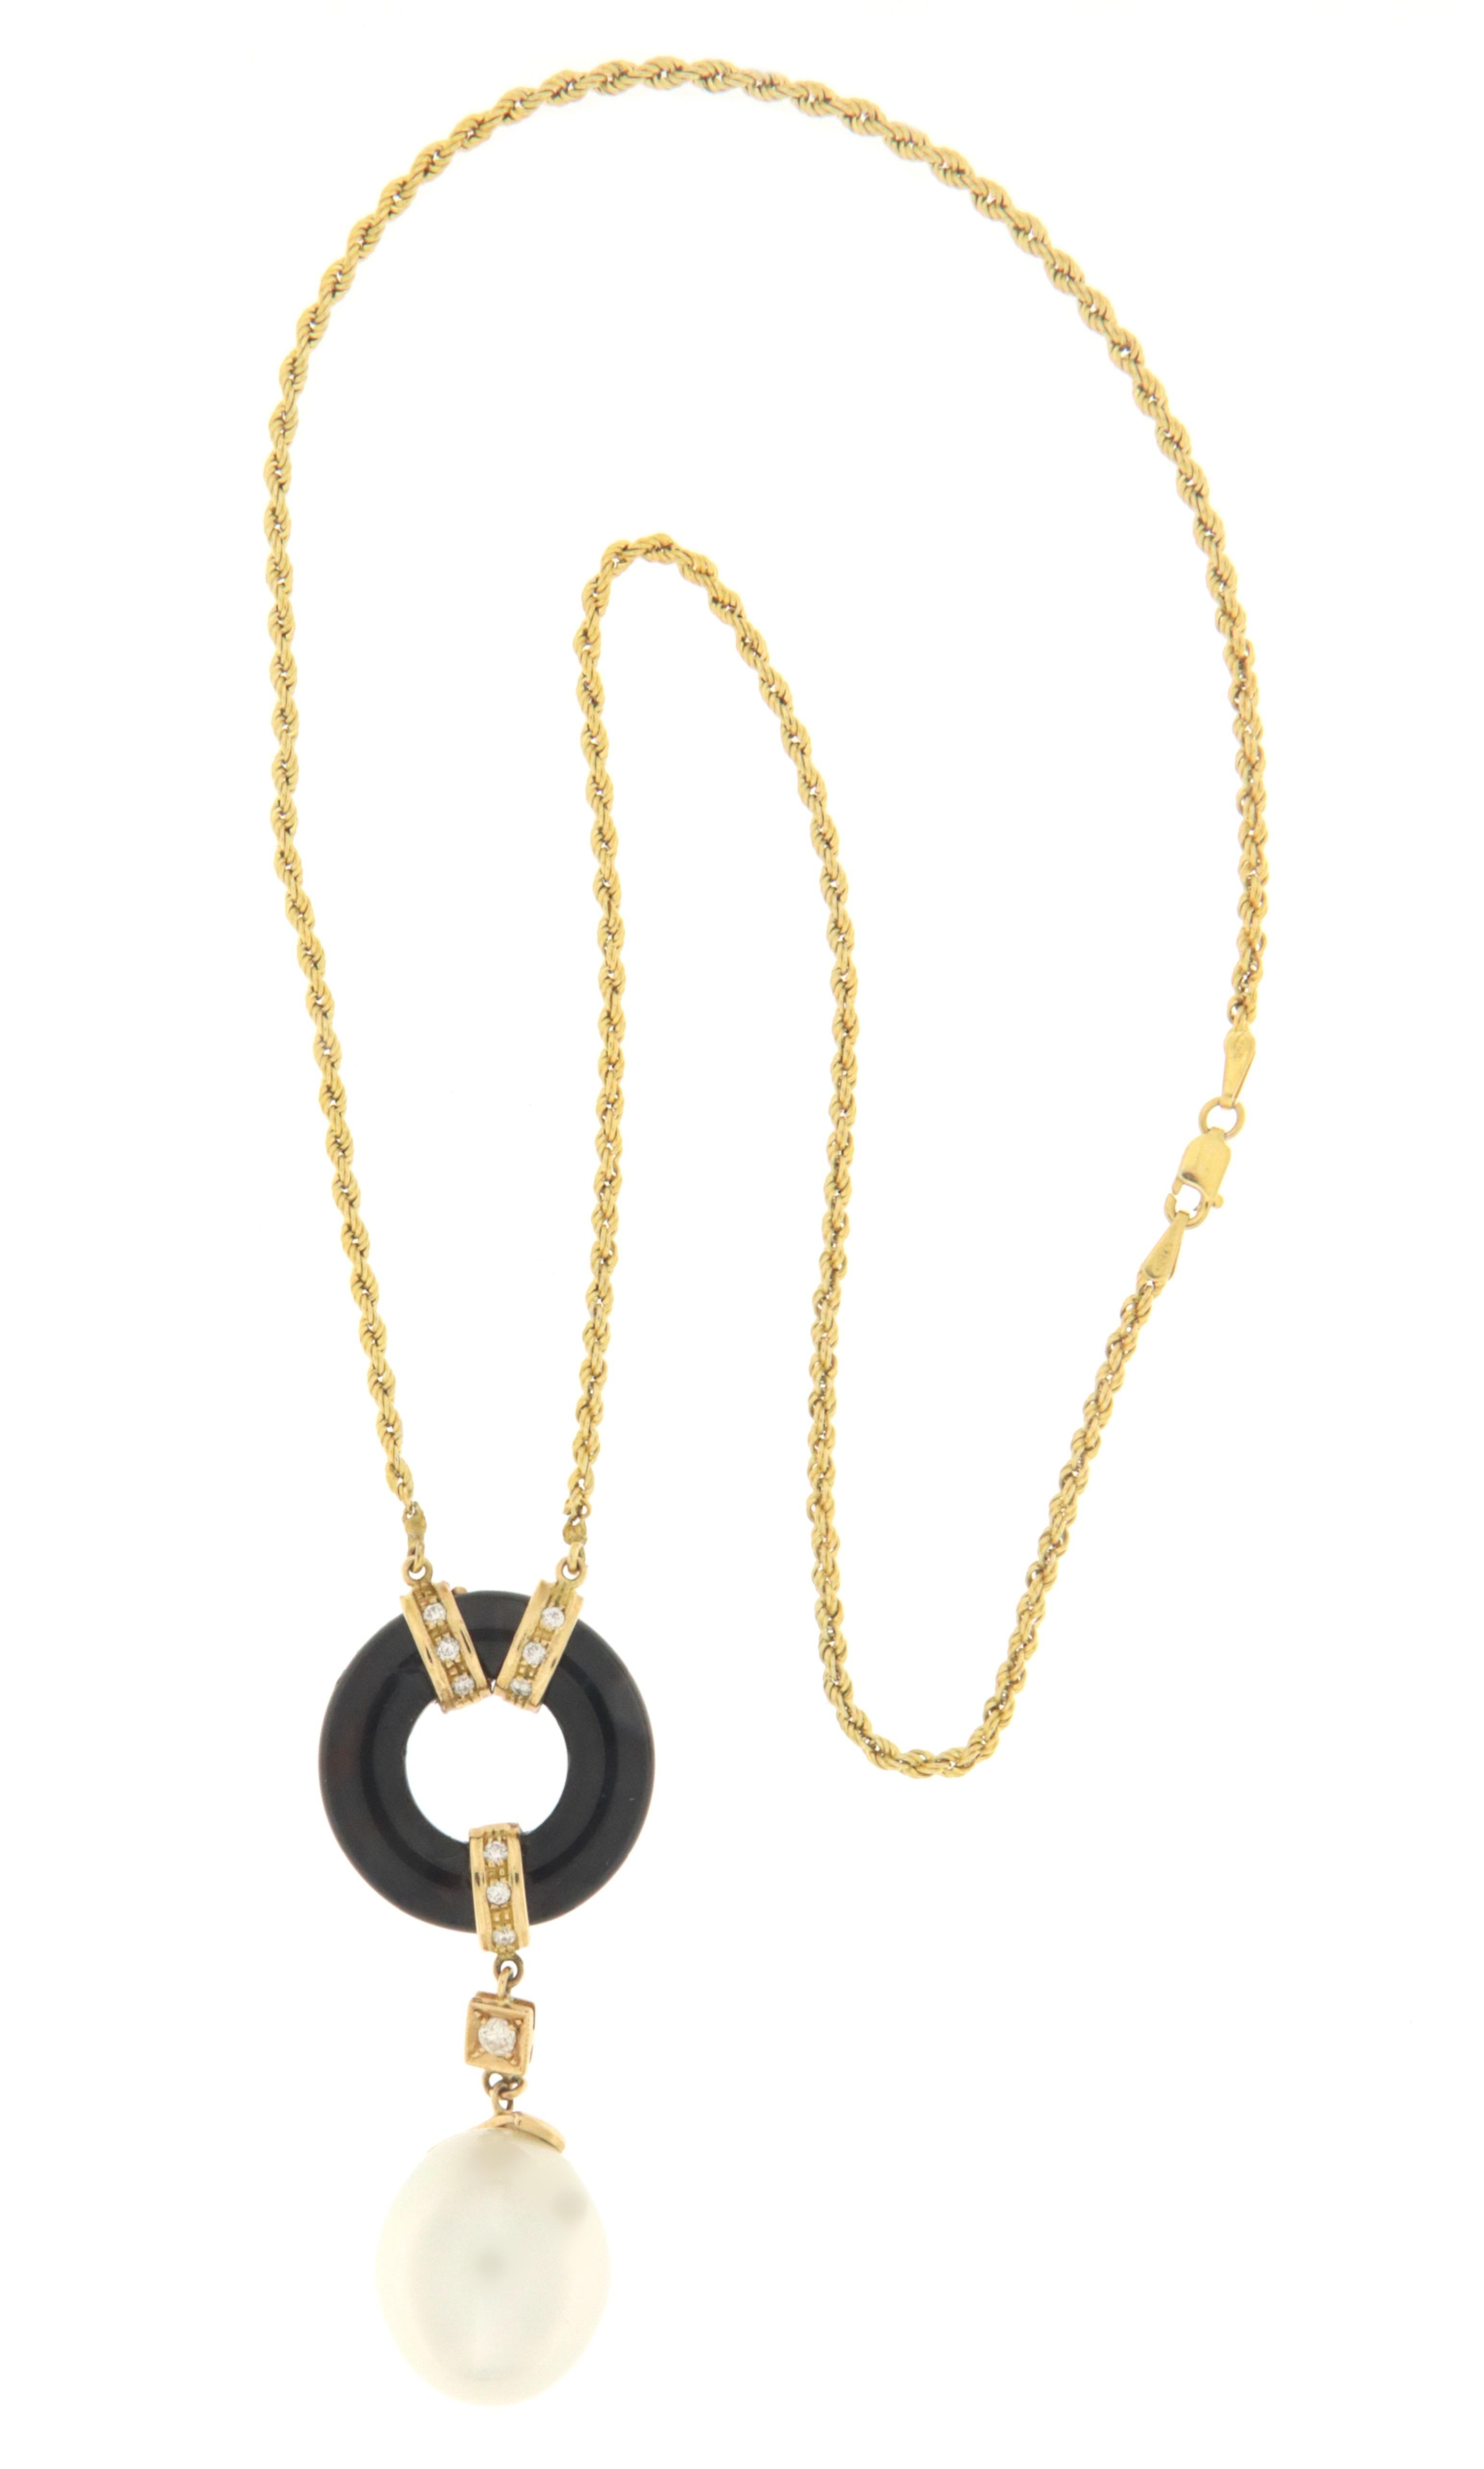 Beautiful 18 karat yellow gold pendant necklace.Handmade by our craftsmen assembled with onyx,diamonds and south sea pearl

Diamonds weight 0.30 karat
Pearls weight 34.14 karat
Pendant total weight 17.70 grams
Chain lenght 49 cm